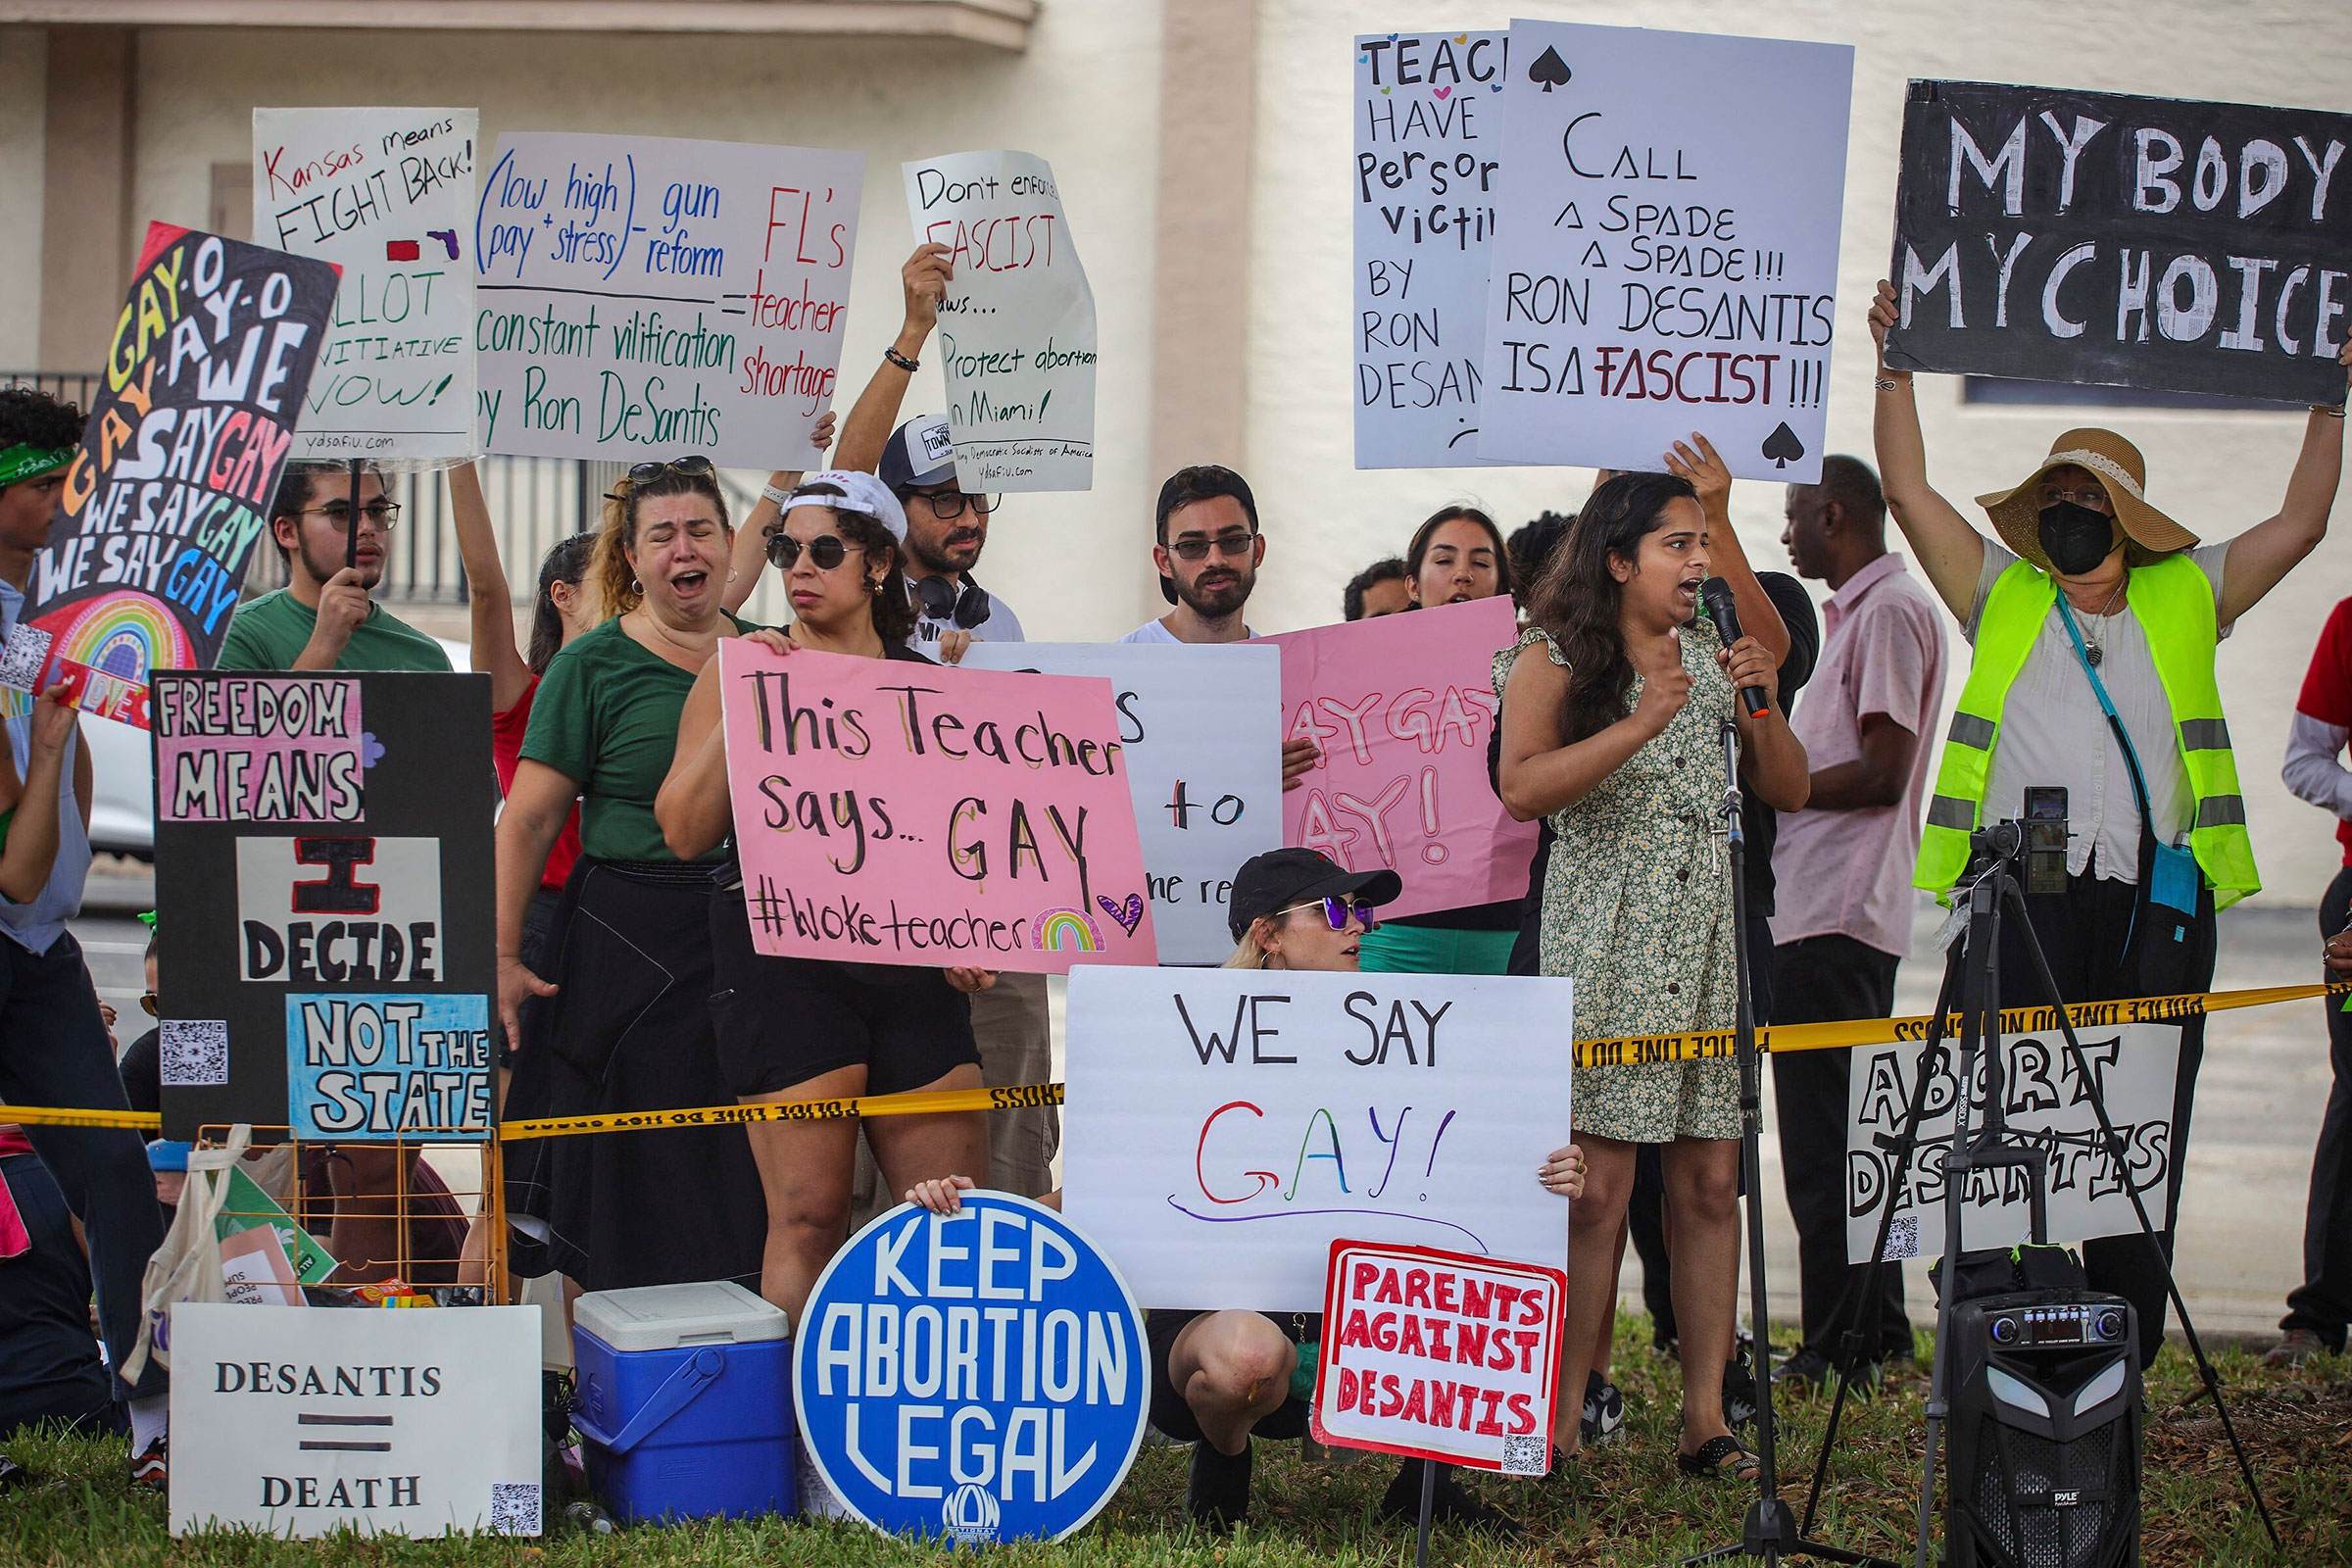 Protestors gather outside the Metro-Dade Firefighters Local 1403 at an event for conservative school board candidates in Doral, Fla. on Aug. 21 2022. The enforcement of Florida's HB 1557—which critics have dubbed the "Don't Say Gay" law—has varied widely by school district. (Carl Juste—Miami Herald/AP)